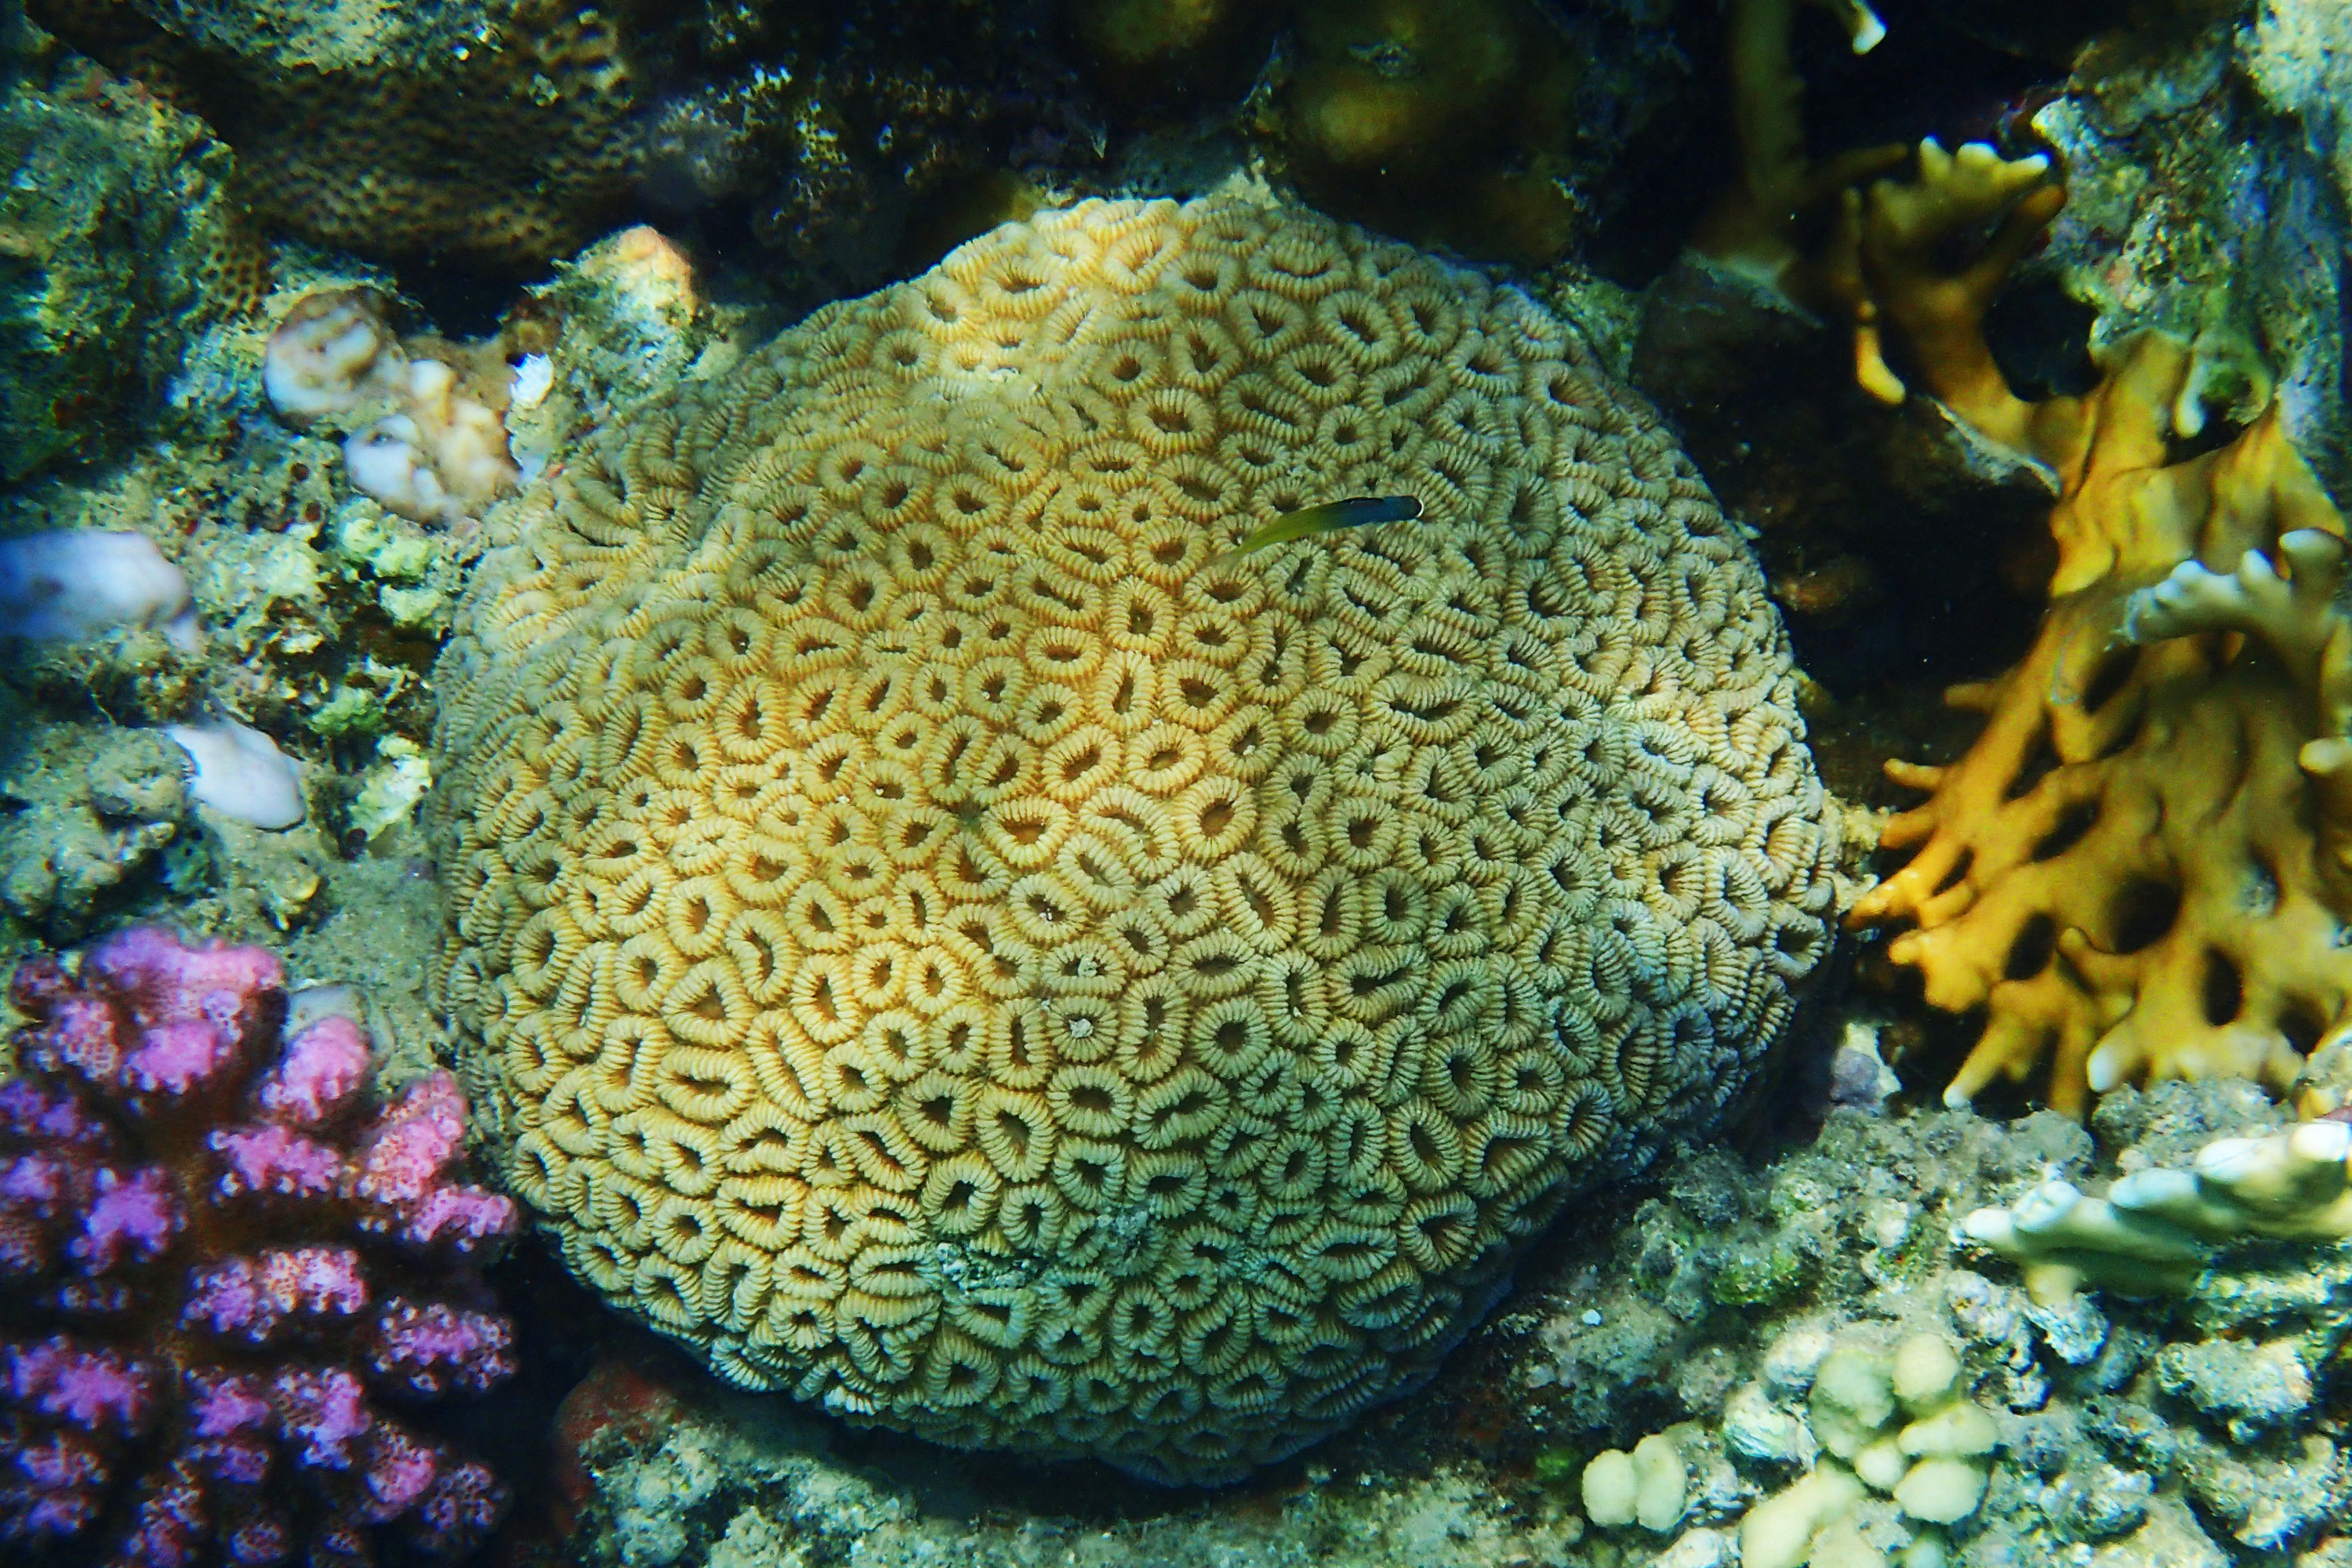 The species identified as possibly at risk include Favia favus (pictured), a type of hard corals commonly found in Hong Kong waters. Photo: Shutterstock